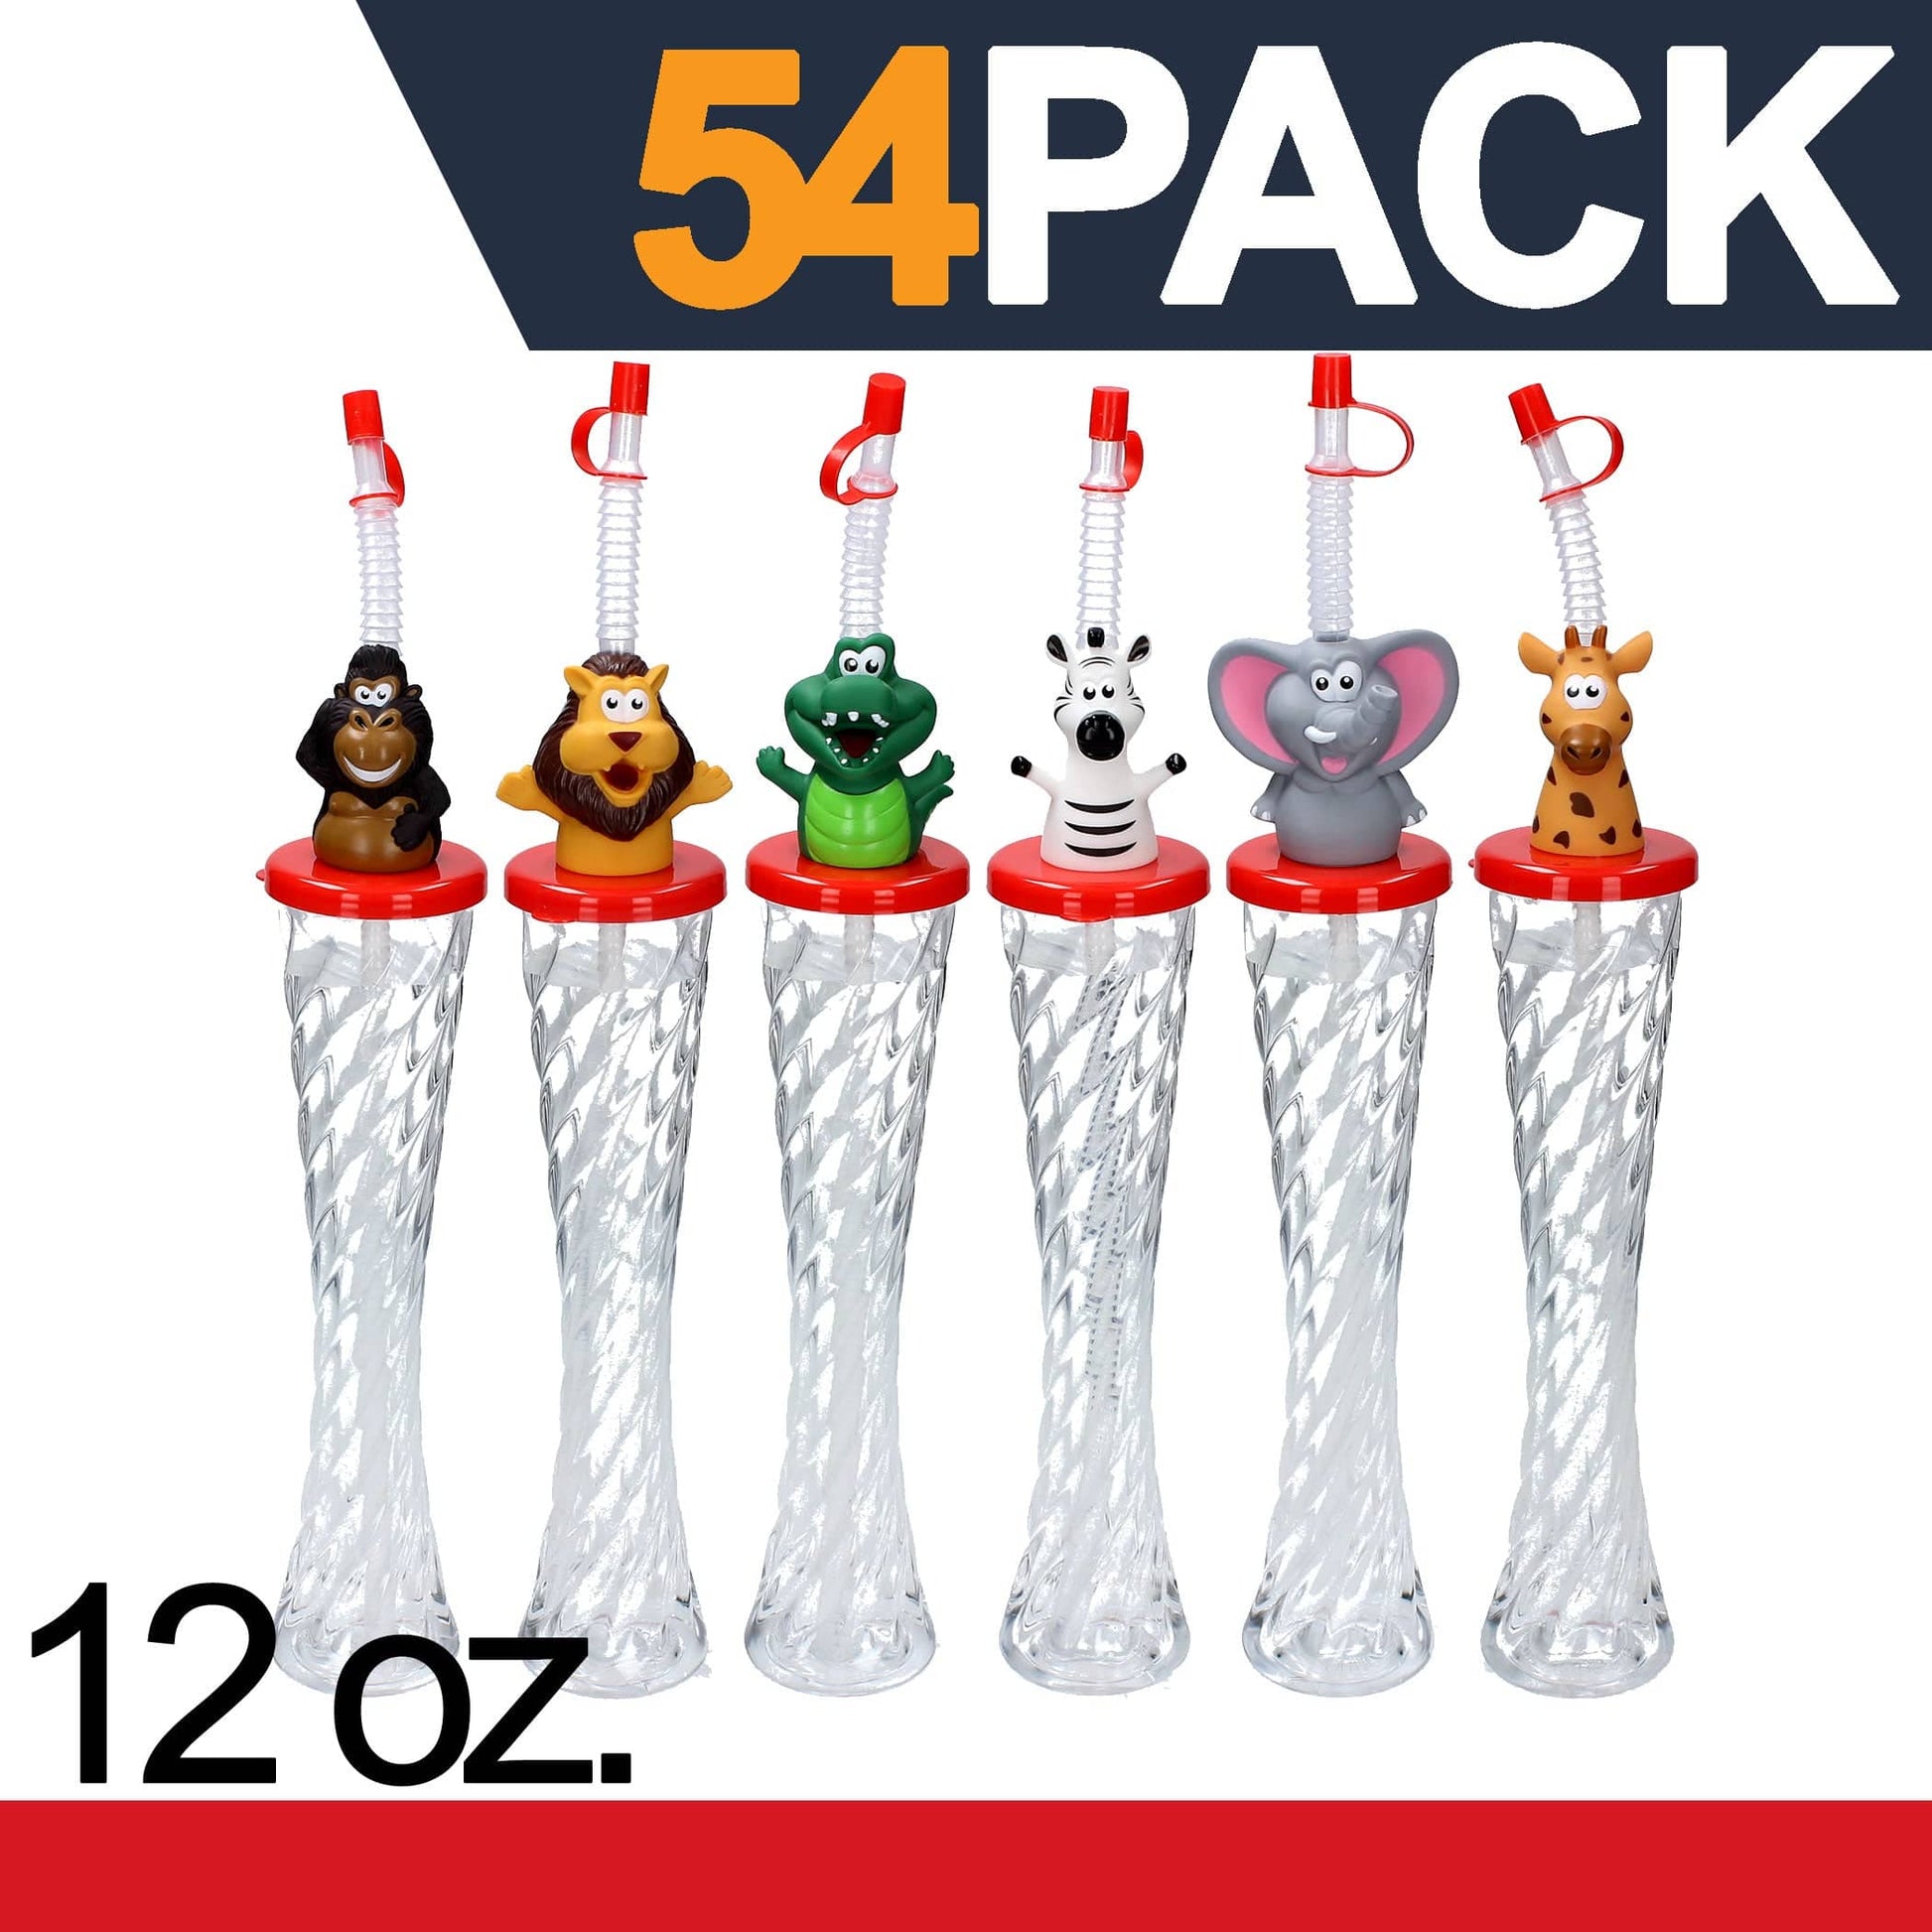 Sweet World USA Yard Cups Animals Twisty Cups (54 Cups) - for Cold or Frozen Drinks, Kids Parties - 12 oz. (350 ml) cups with lids and straws